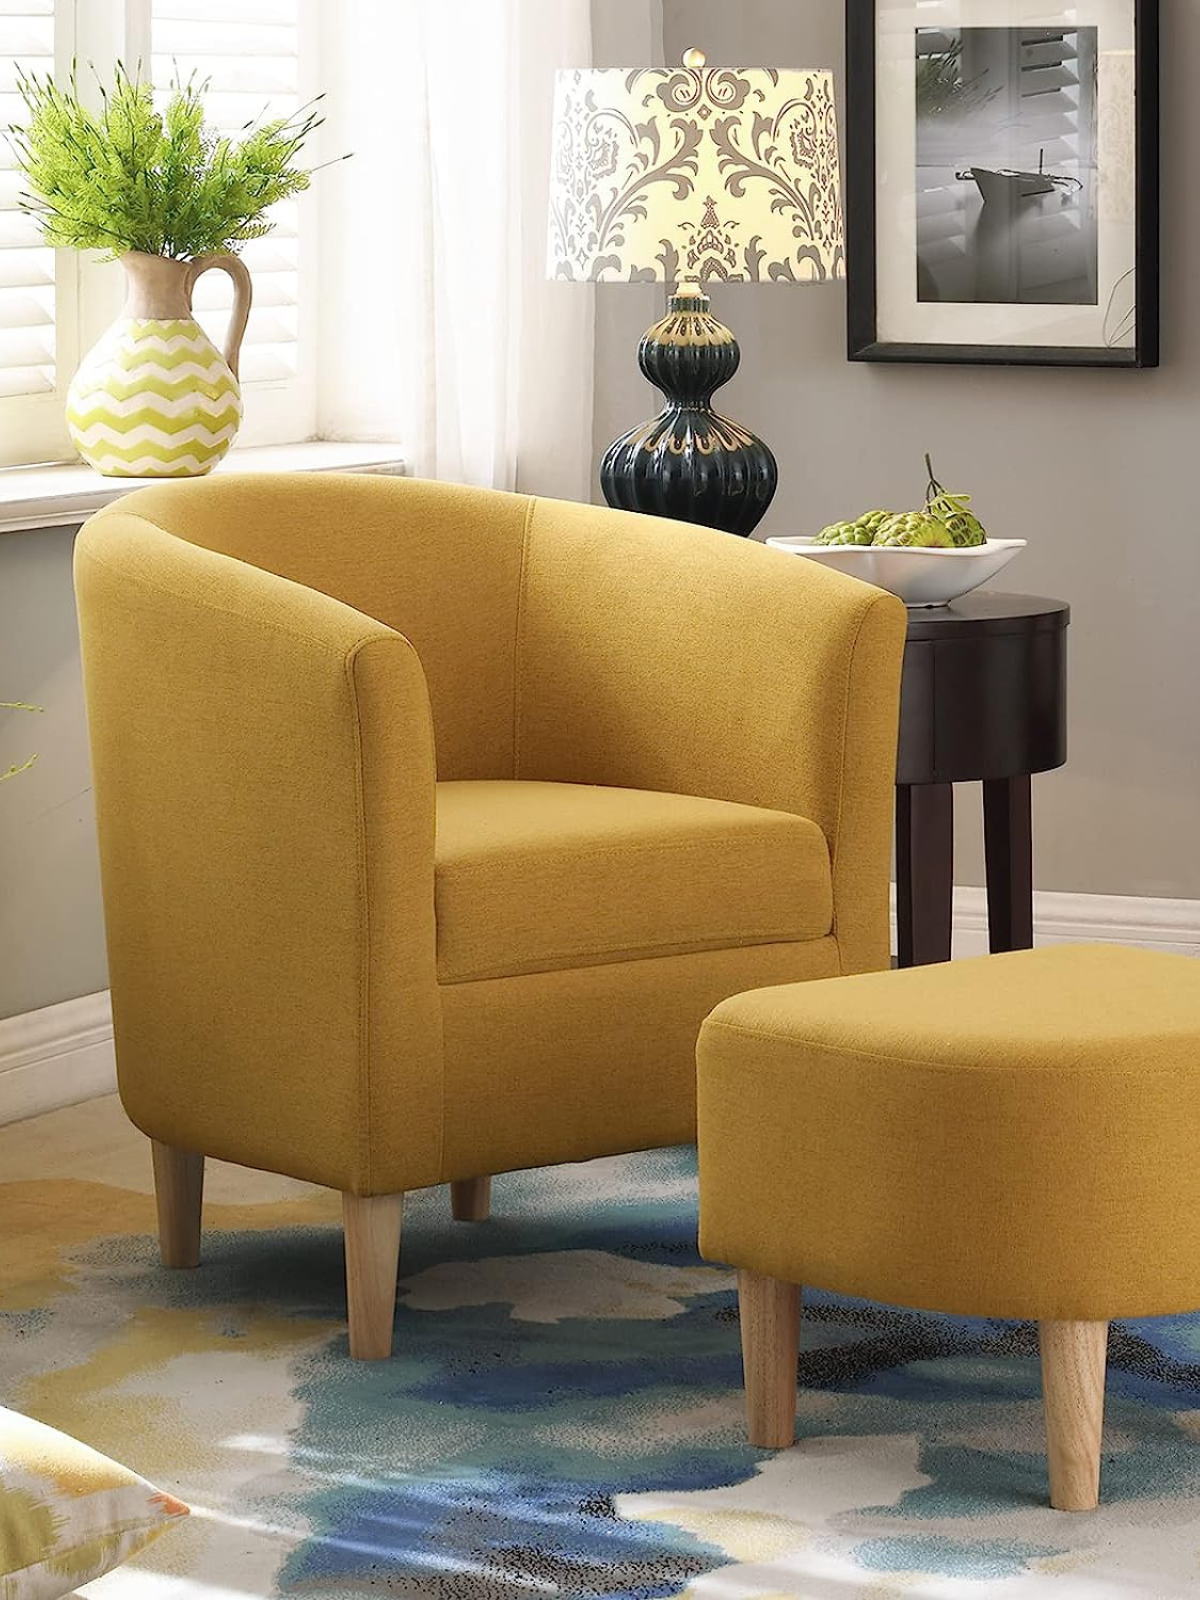 Modern Accent Chair, Upholstered Arm Chair Linen Fabric Single Sofa Chair with Ottoman Foot Rest Mustard Yellow Comfy Armchair for Living Room Bedroom Small Spaces Apartment Office